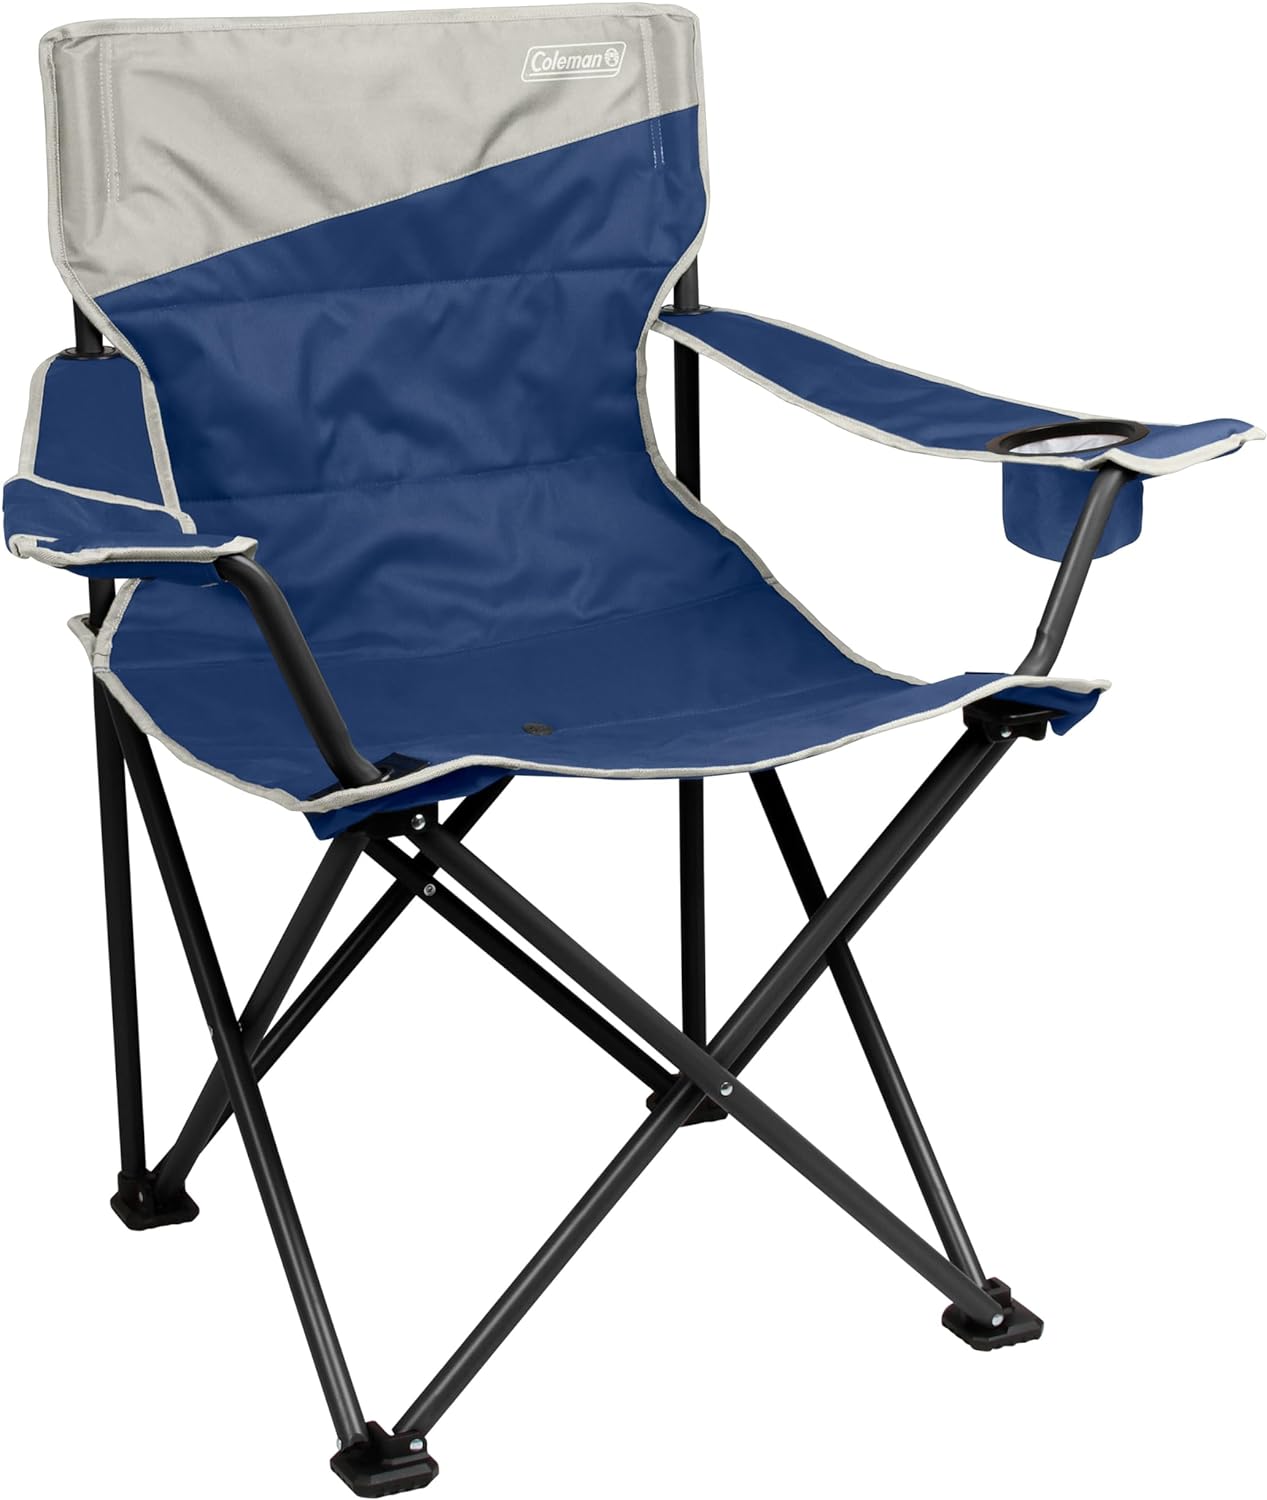 Coleman Big & Tall Quad Camp Chair (Supports 600-lbs, Blue) $25 + Free Shipping